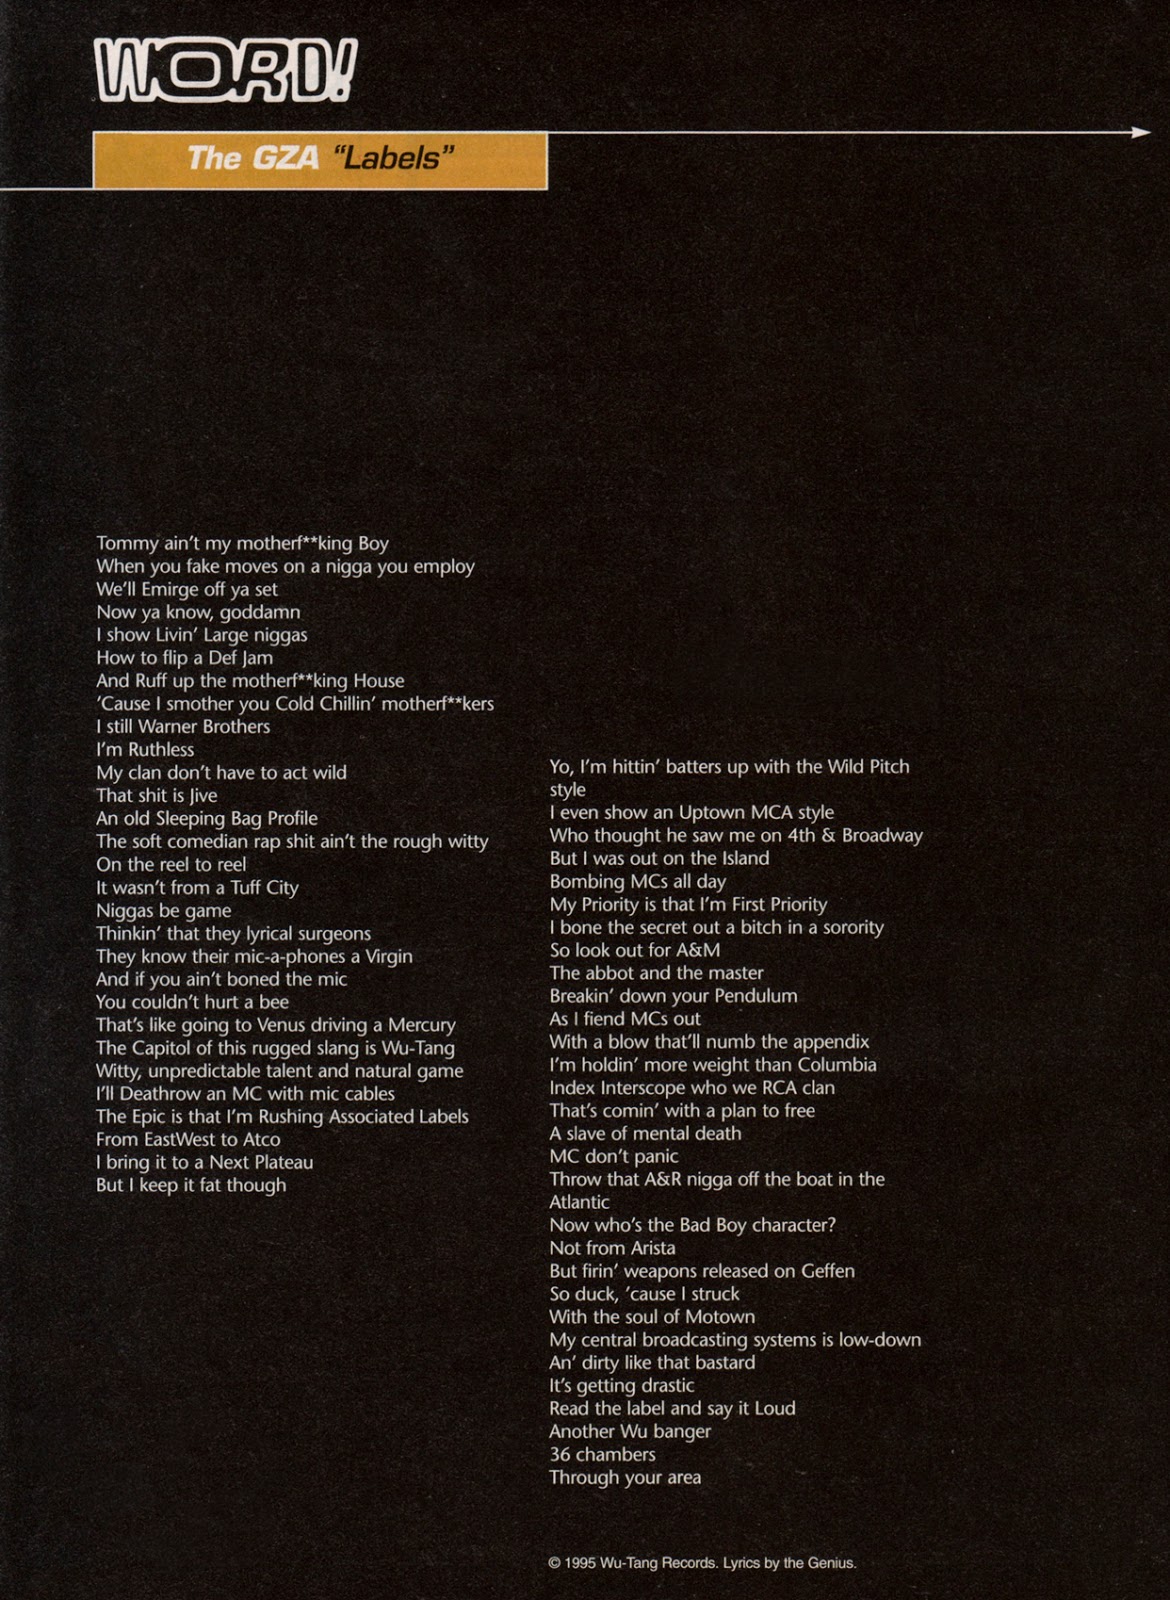 The GZA 'Labels' Word! Feature in Rap Pages (Oct, 1995) Lyrics